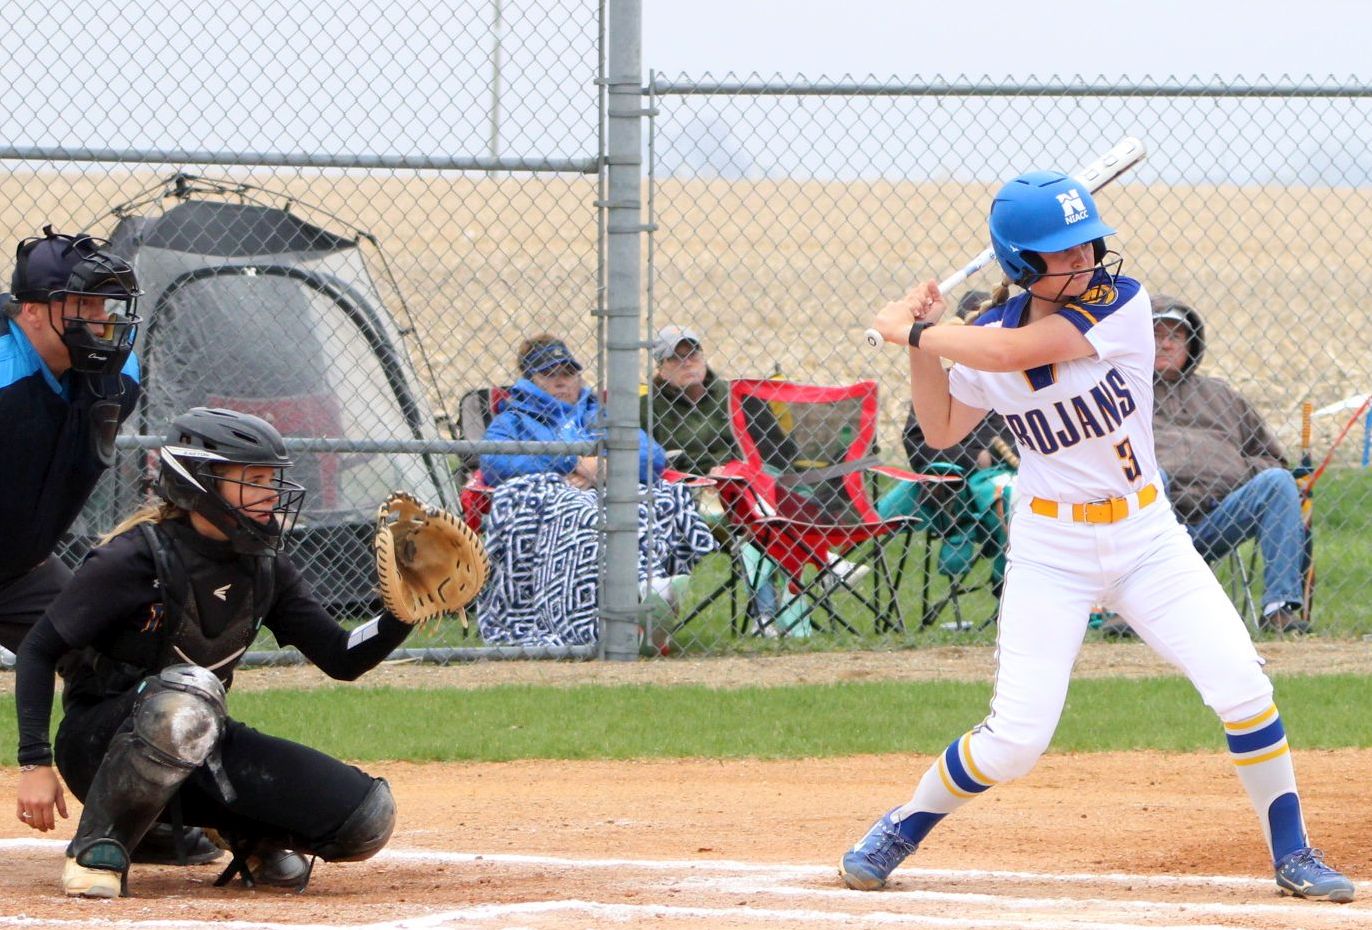 Laken Lienhard is now playing softball at the University of St. Thomas, a NCAA Division I school in St. Paul, Minn.